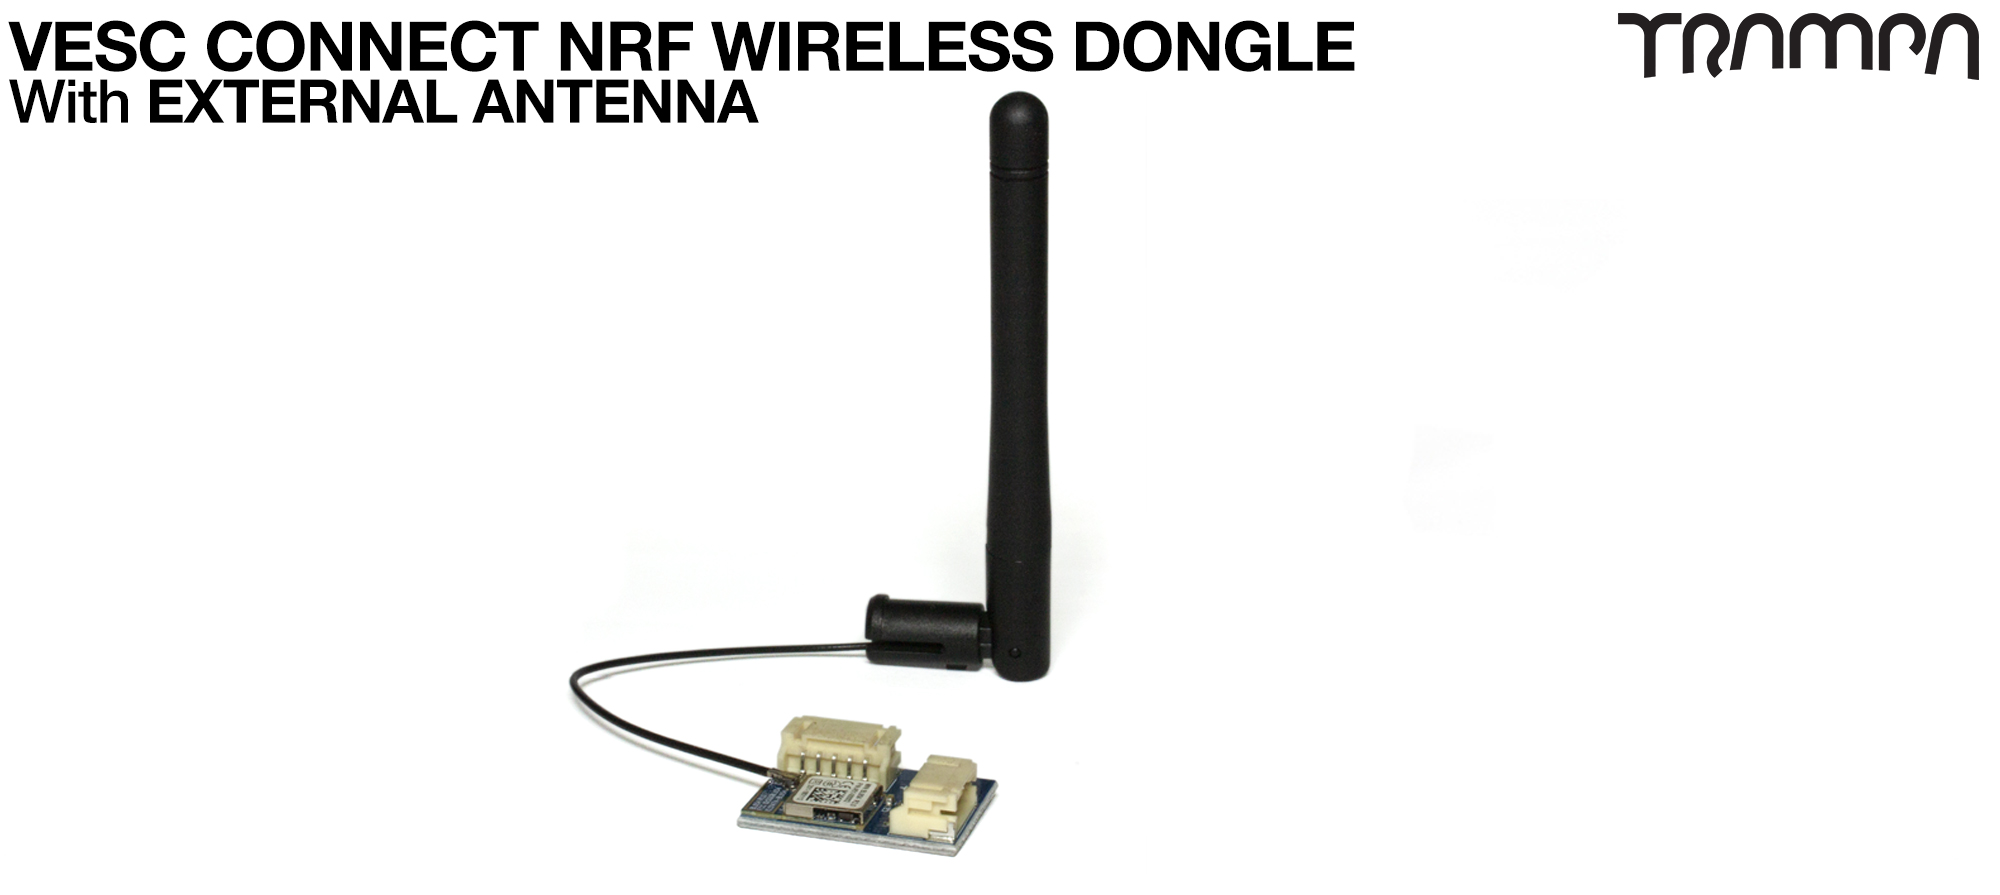 EXTERNAL ARIAL NRF VESC Connect Dongle (+£35) - OUT OF STOCK